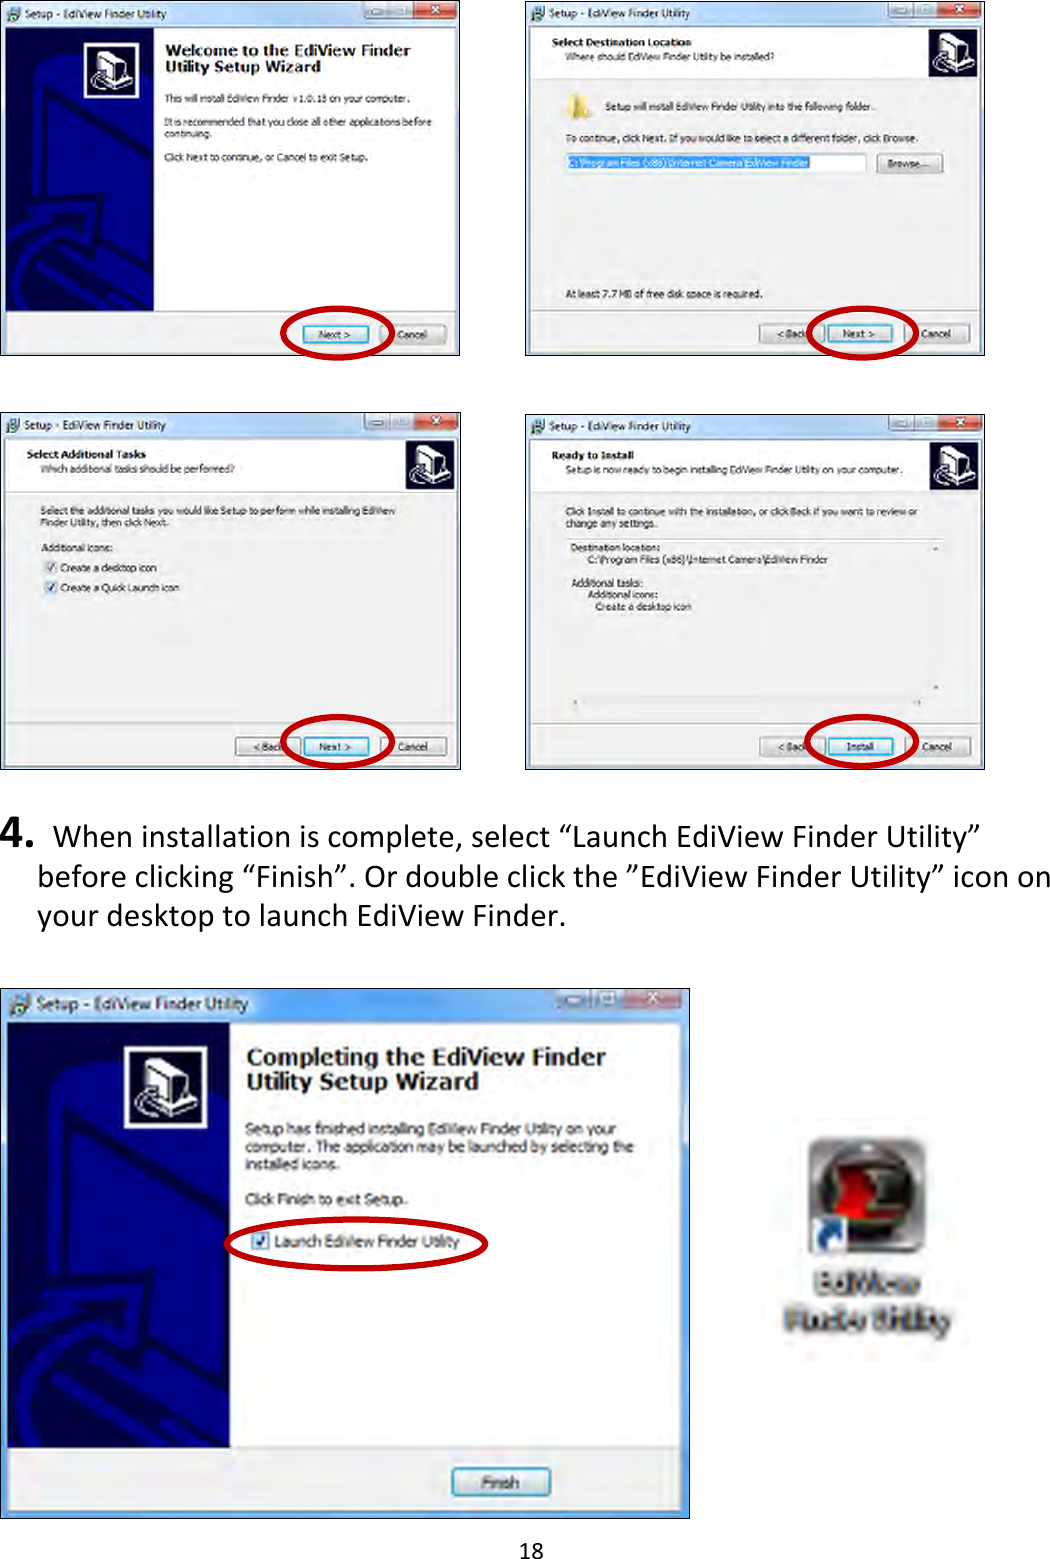 18         4.   When installation is complete, select “Launch EdiView Finder Utility” before clicking “Finish”. Or double click the ”EdiView Finder Utility” icon on your desktop to launch EdiView Finder.   